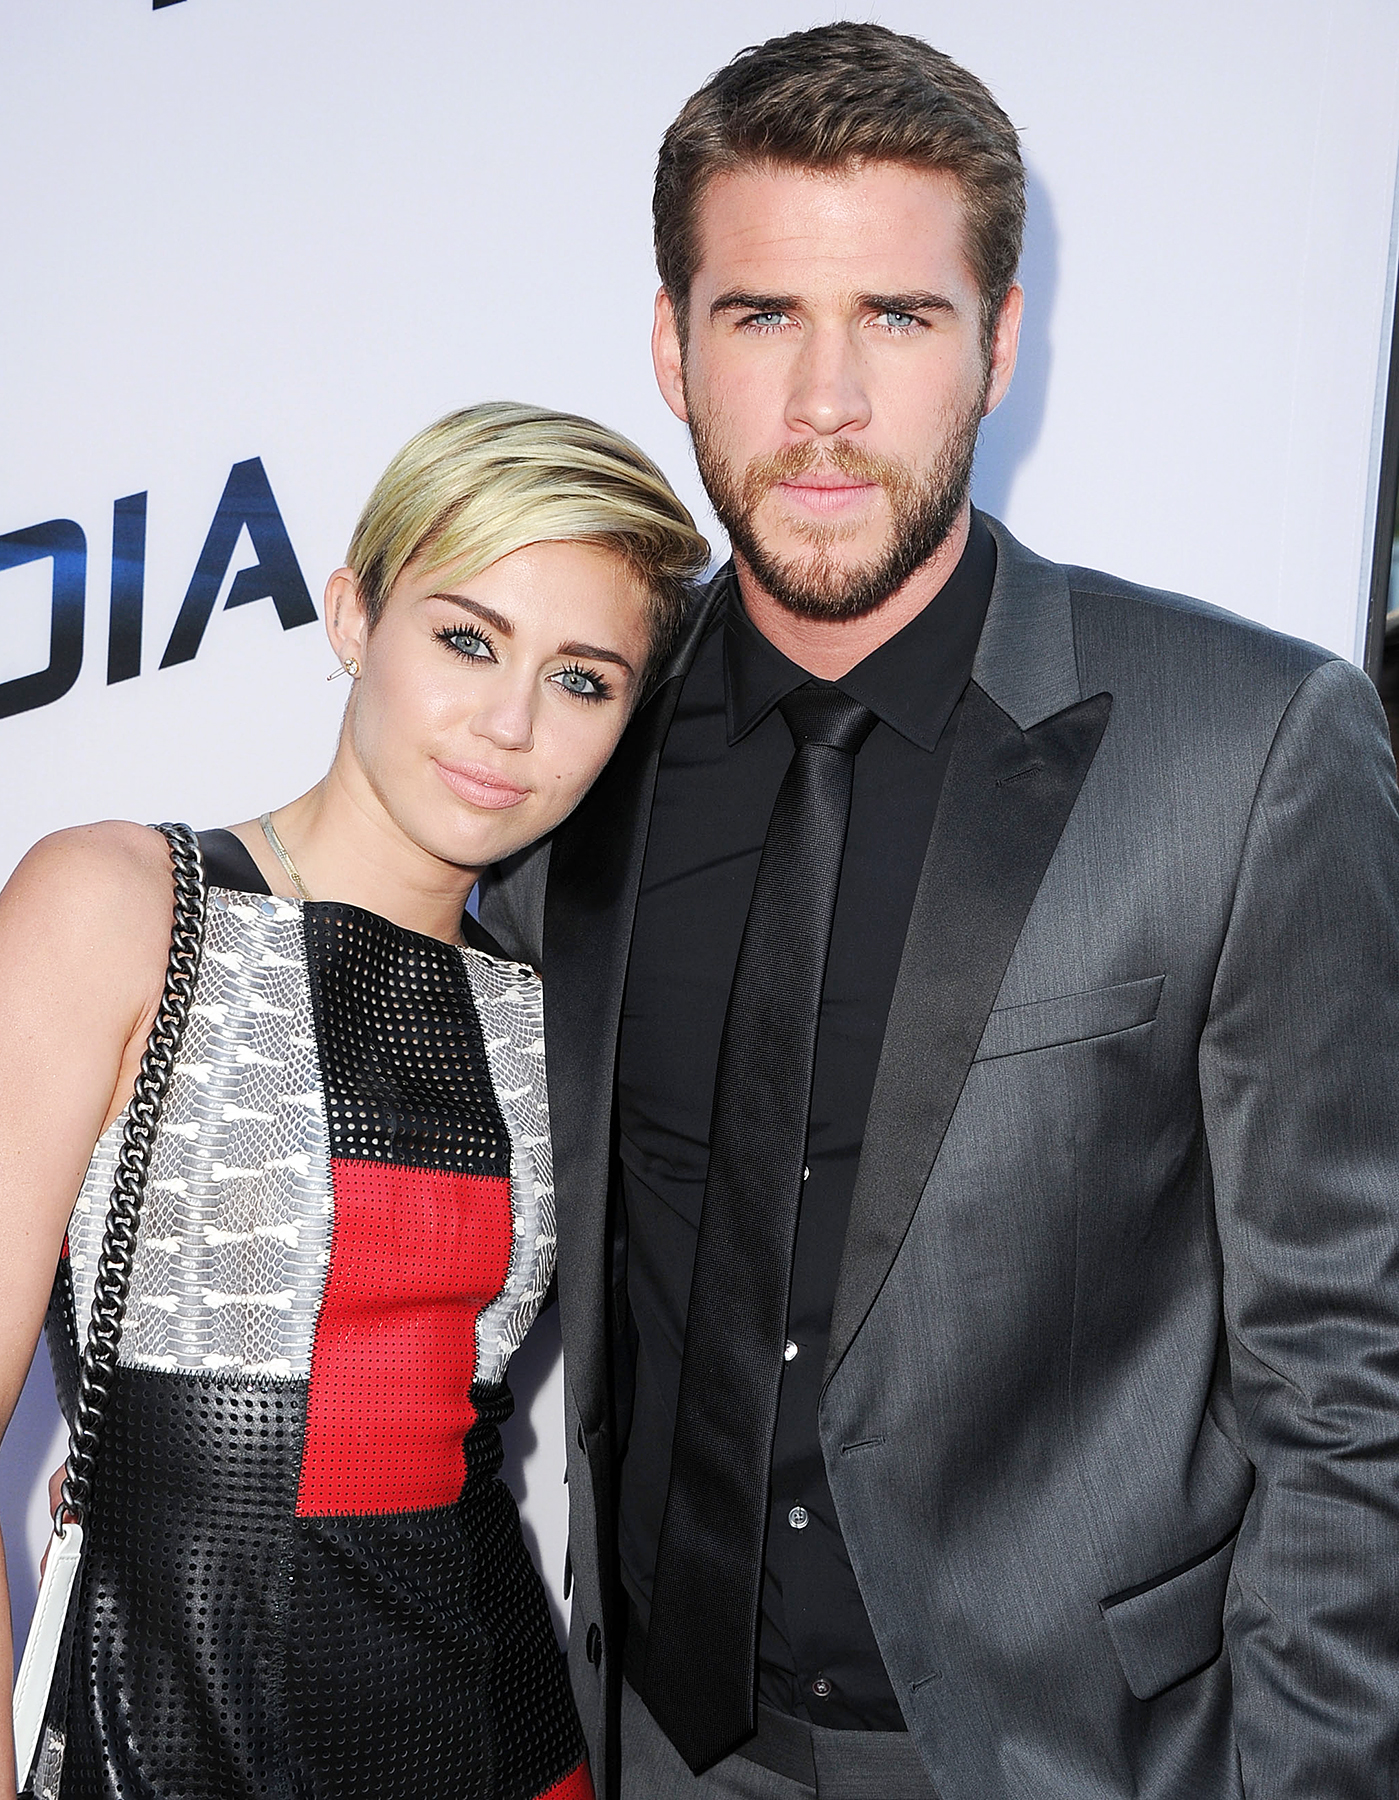 Miley Cyrus ‘Would Have Told People’ if She Was Married